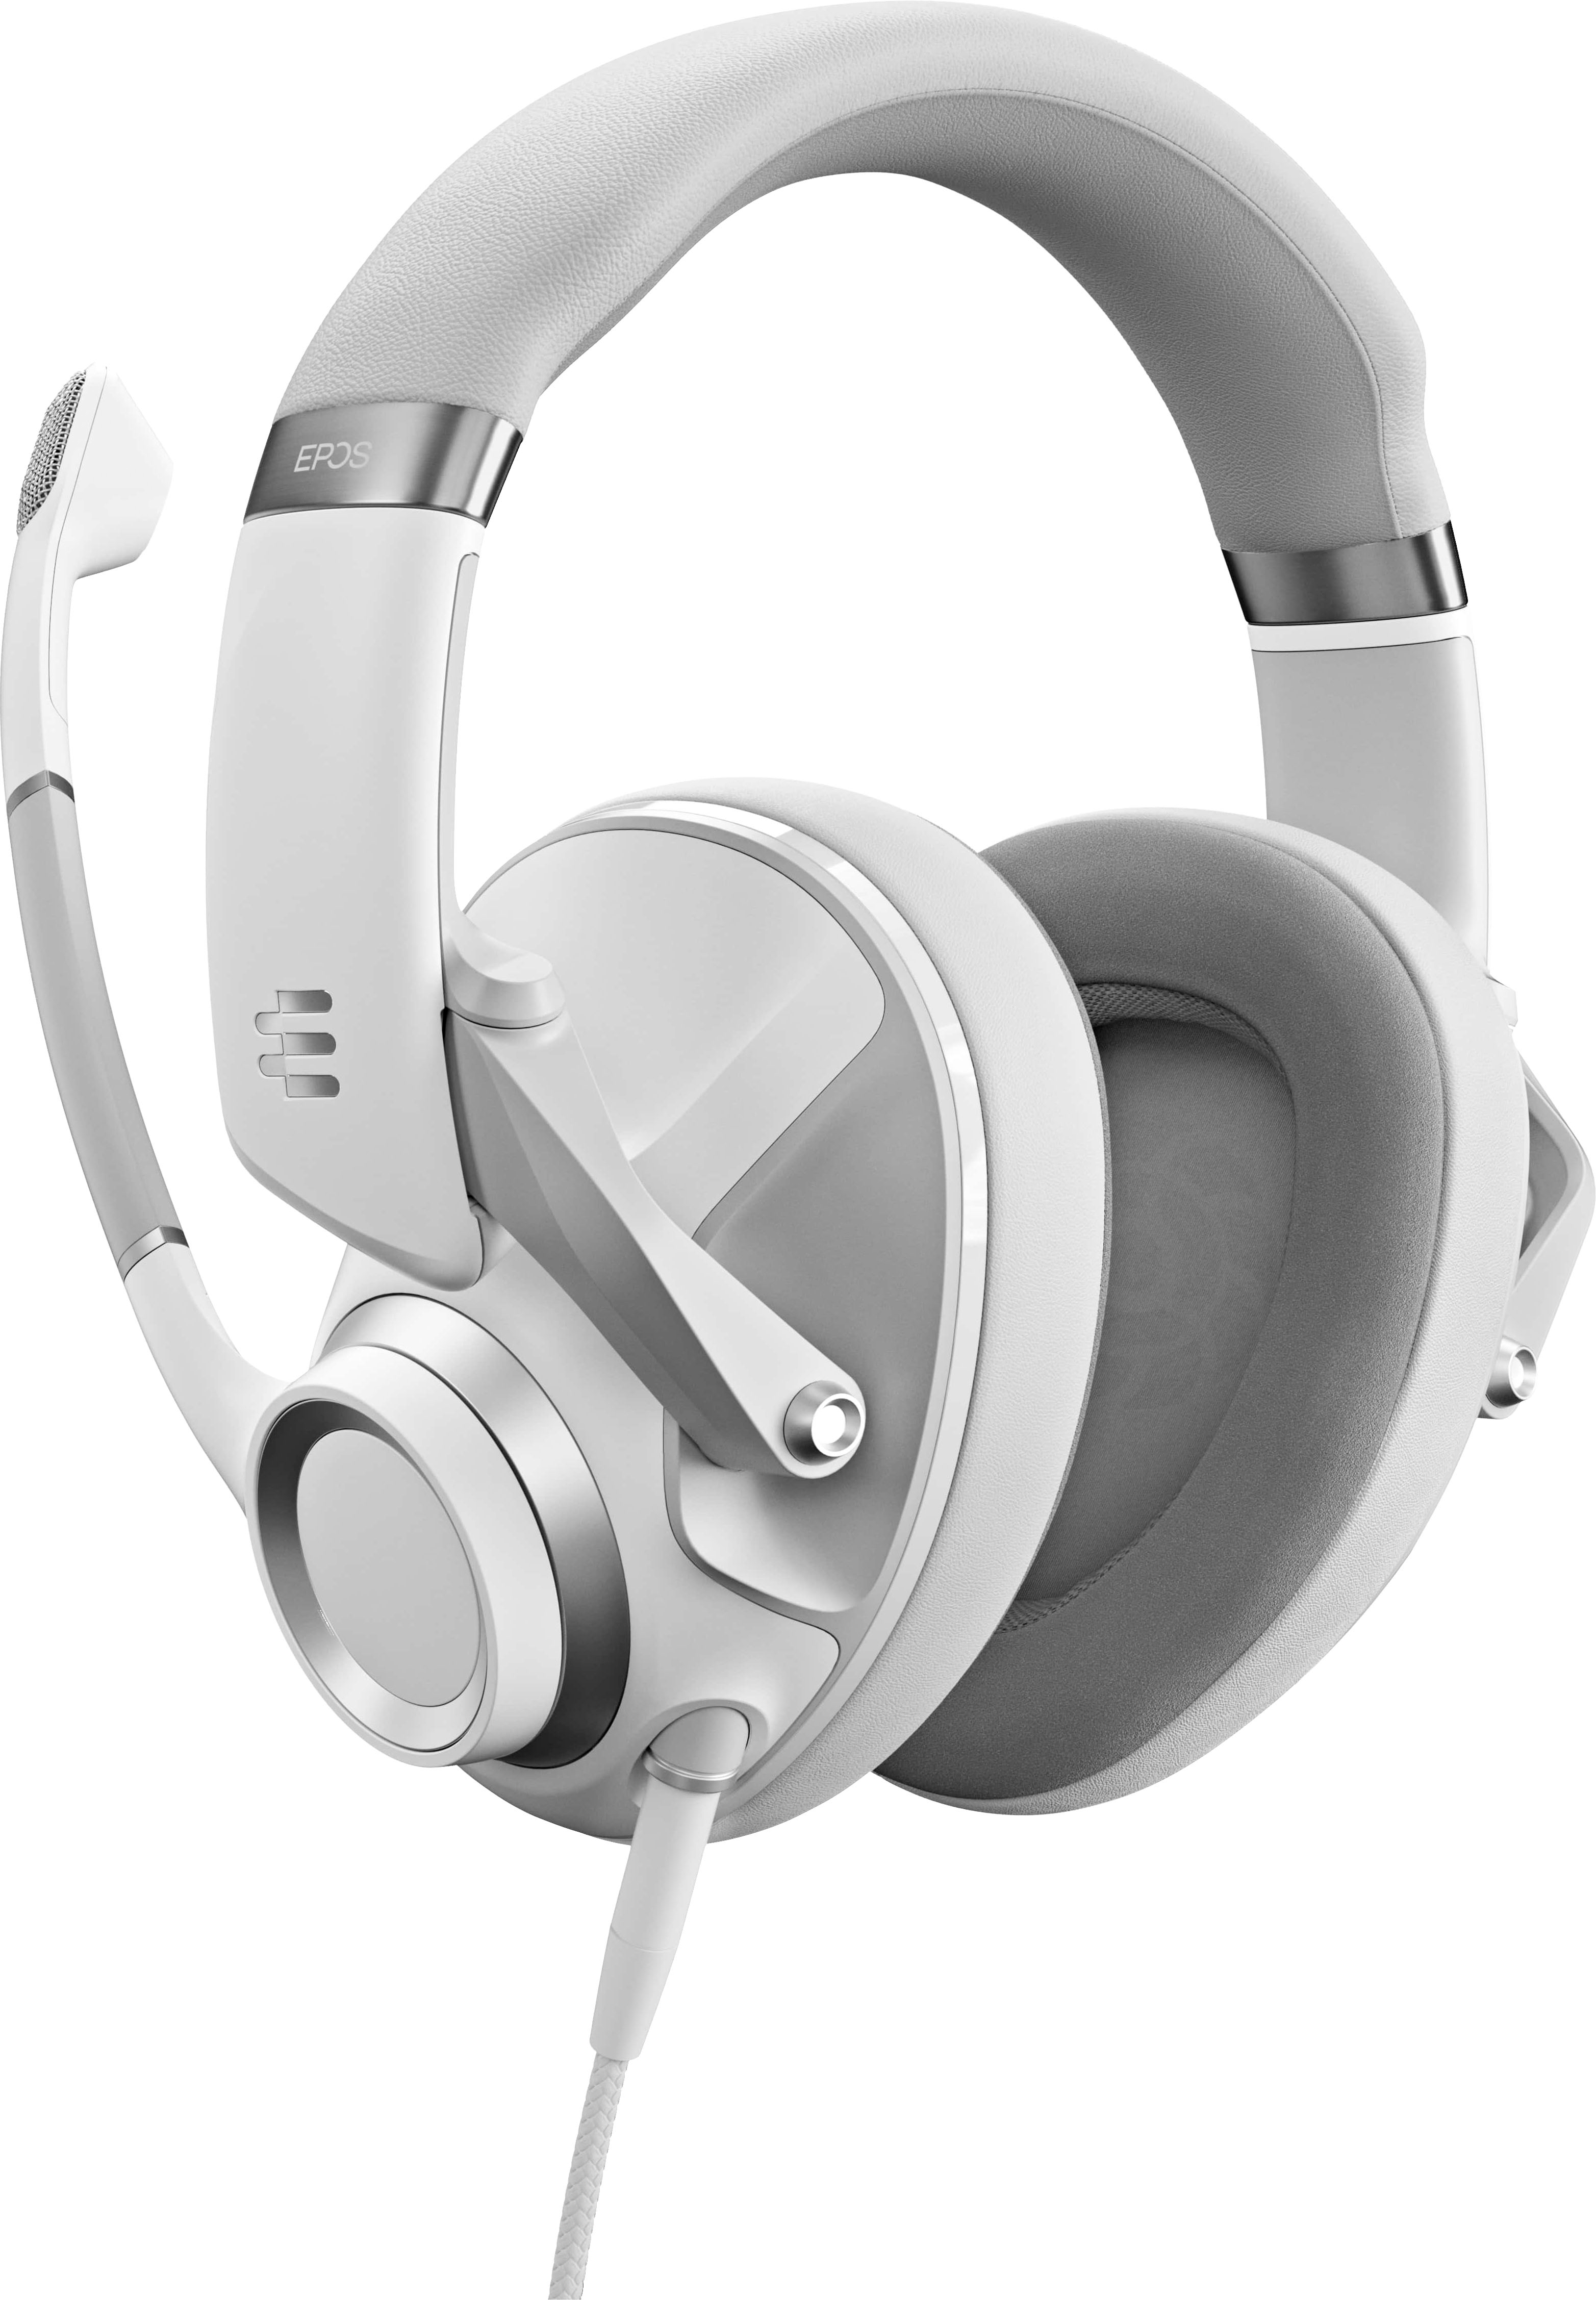 Angle View: EPOS - H6PRO Wired Closed Acoustic Gaming Headset - Ghost White